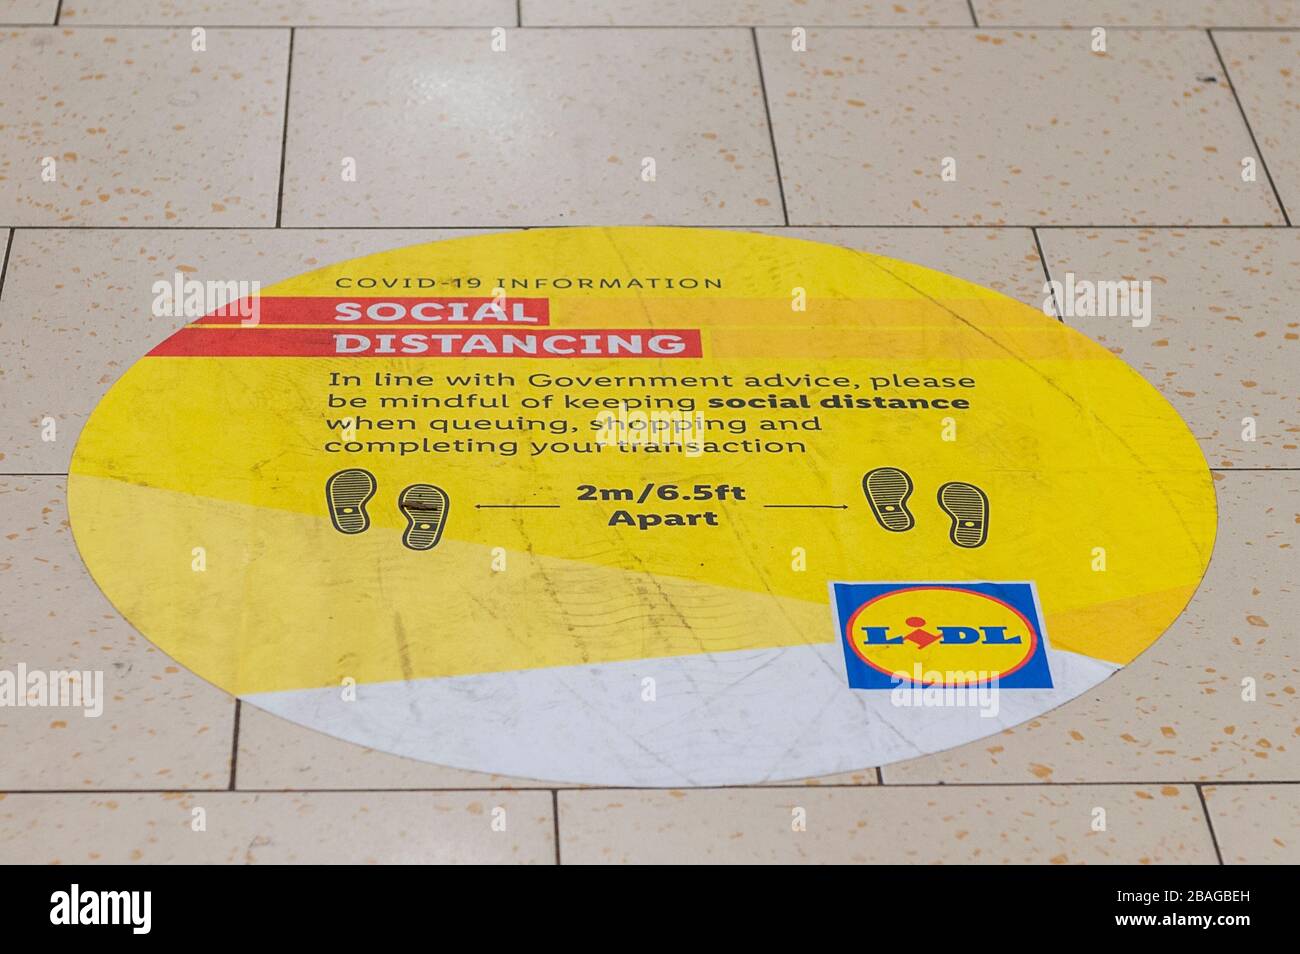 Clonakilty, West Cork, Ireland. 27th Mar, 2020. A social distancing sign in Lidl Supermarket, Clonakilty. Three more people have died from Covid-19 in the Republic today. This brings the total to 22 deaths with 2,121 cases of Covid-19 in Eire. Credit: Andy Gibson/Alamy Live News Stock Photo